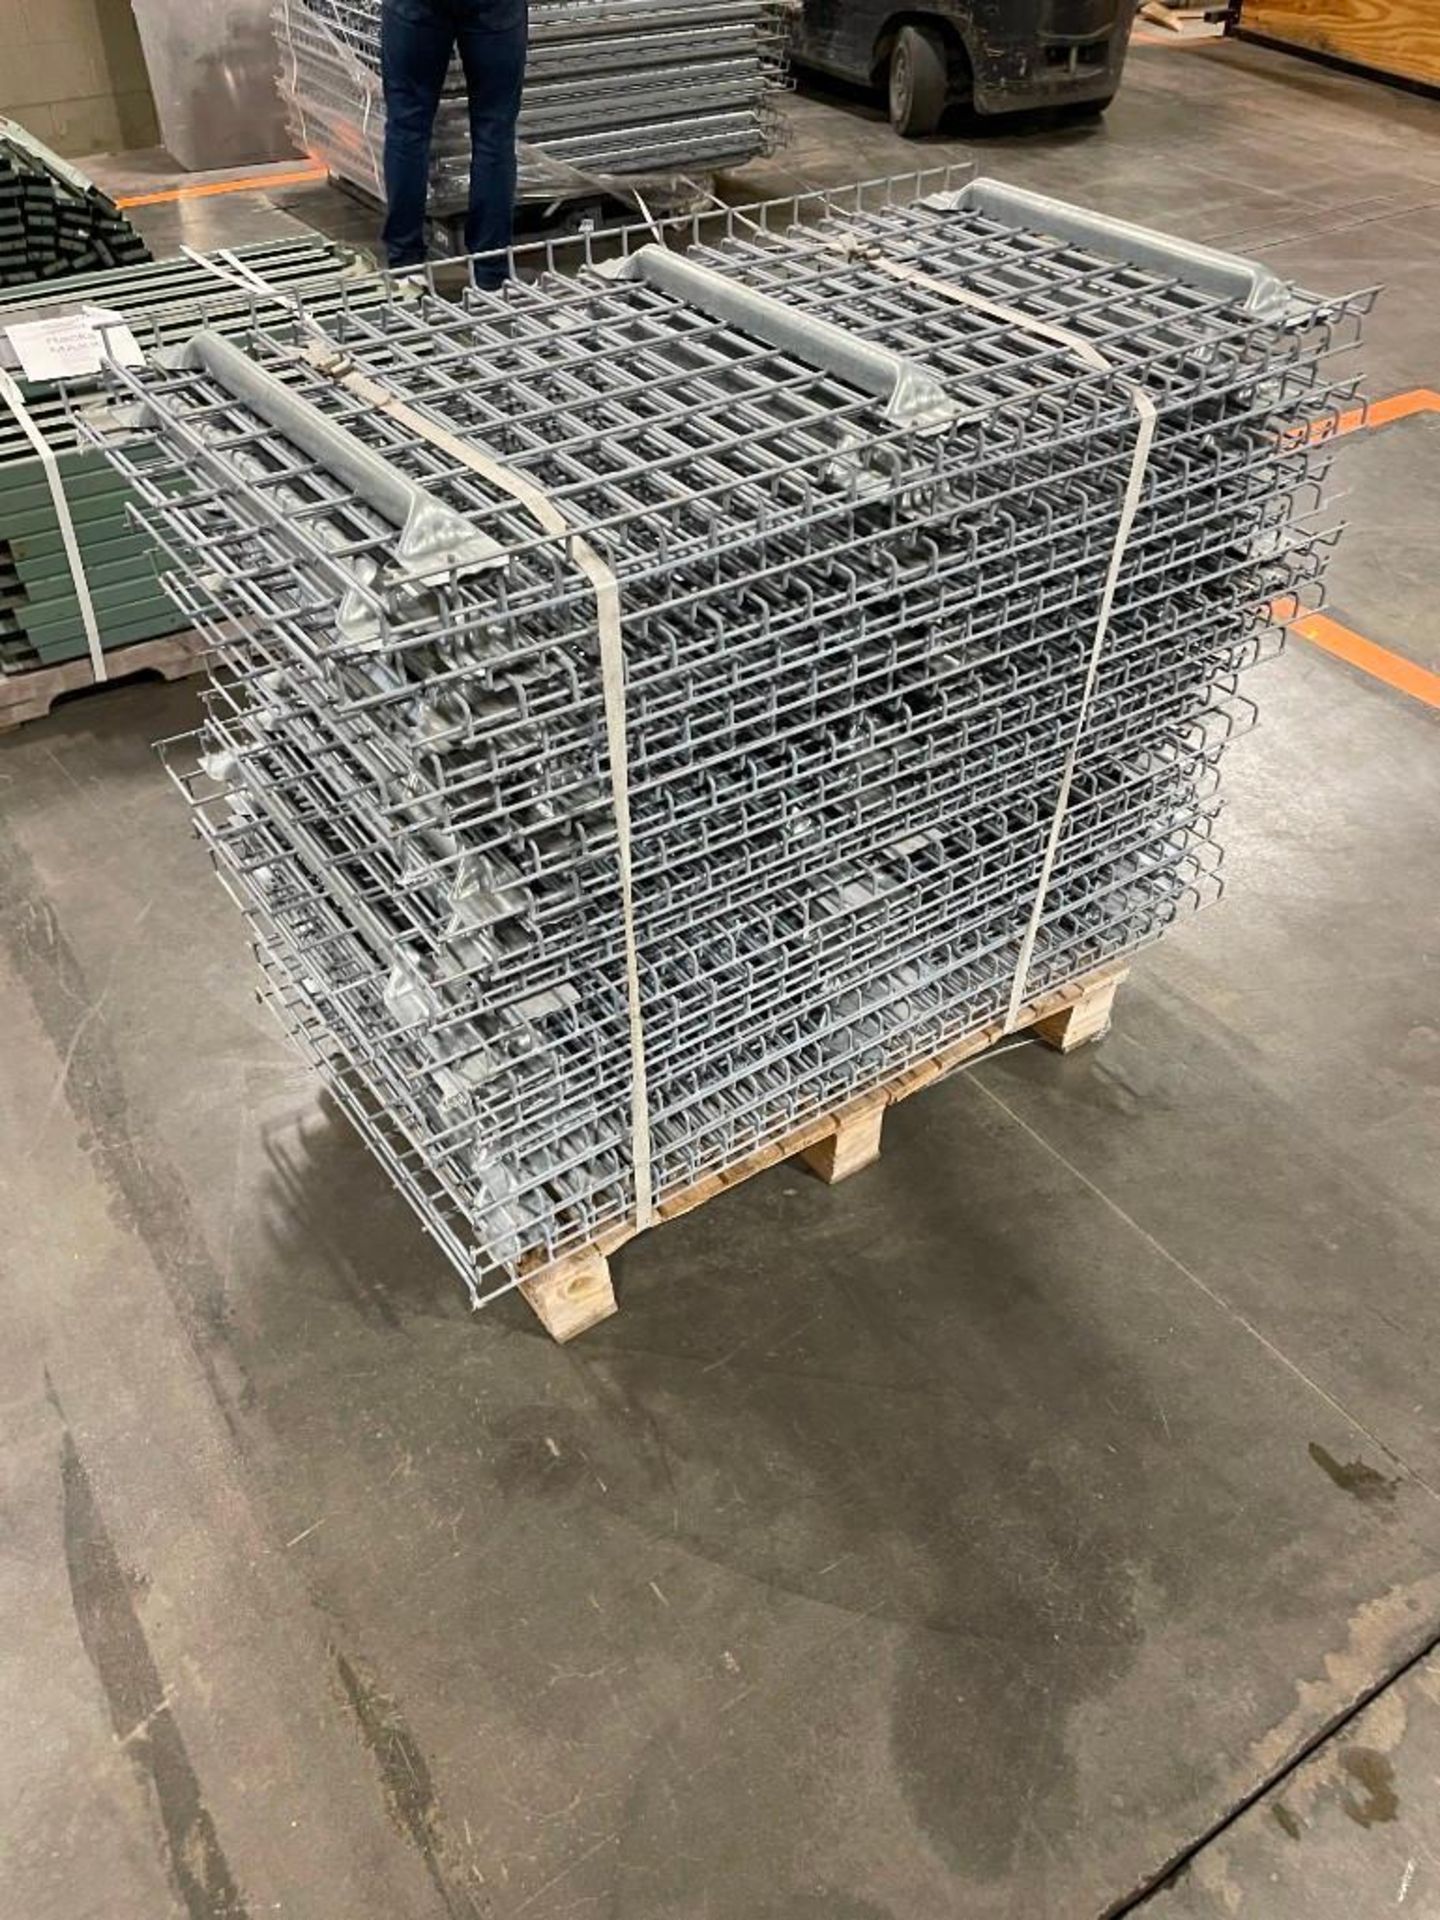 Lot of Pallet Racking, (35) Wire Baskets 25" x 46" - Image 2 of 2